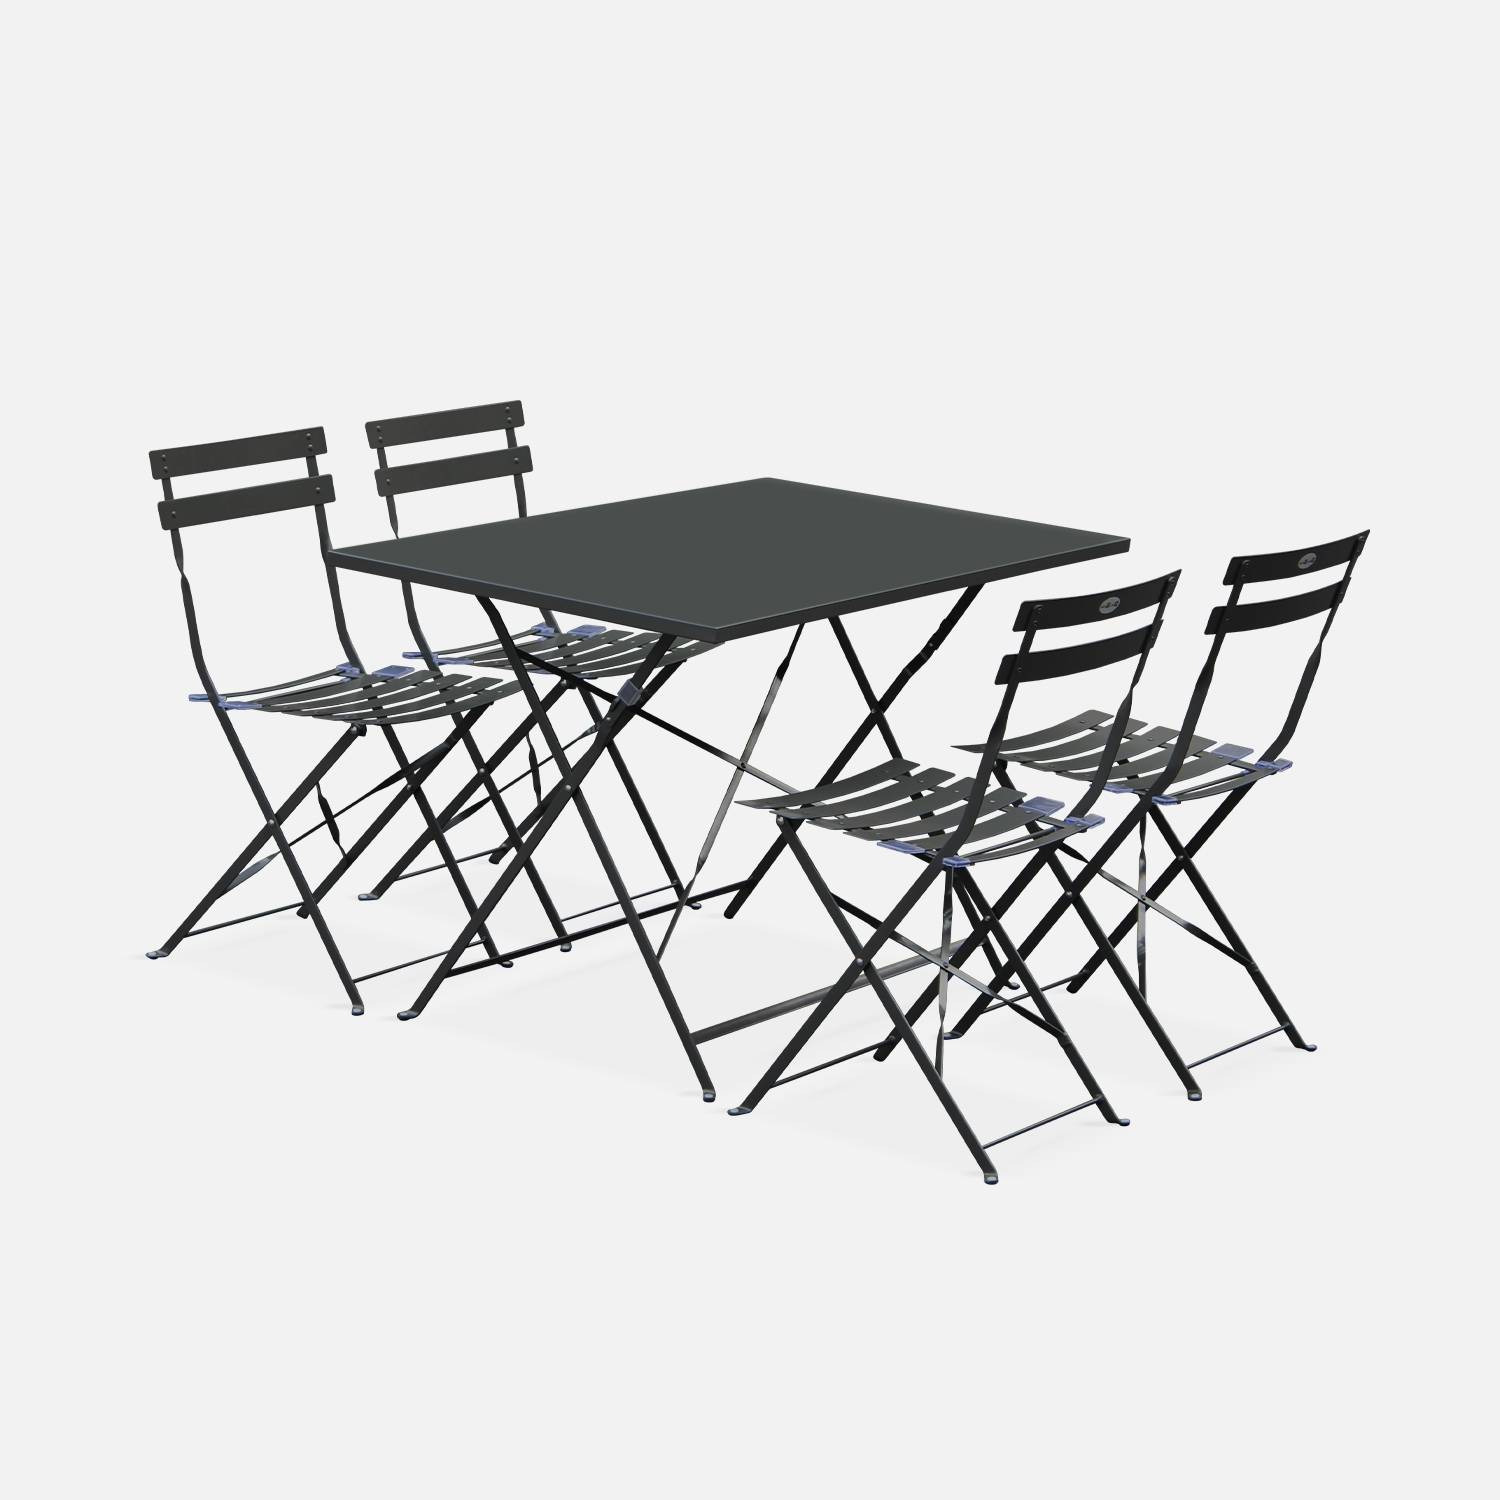 4-seater foldable thermo-lacquered steel bistro garden table with chairs, 110x70cm, Anthracite | sweeek